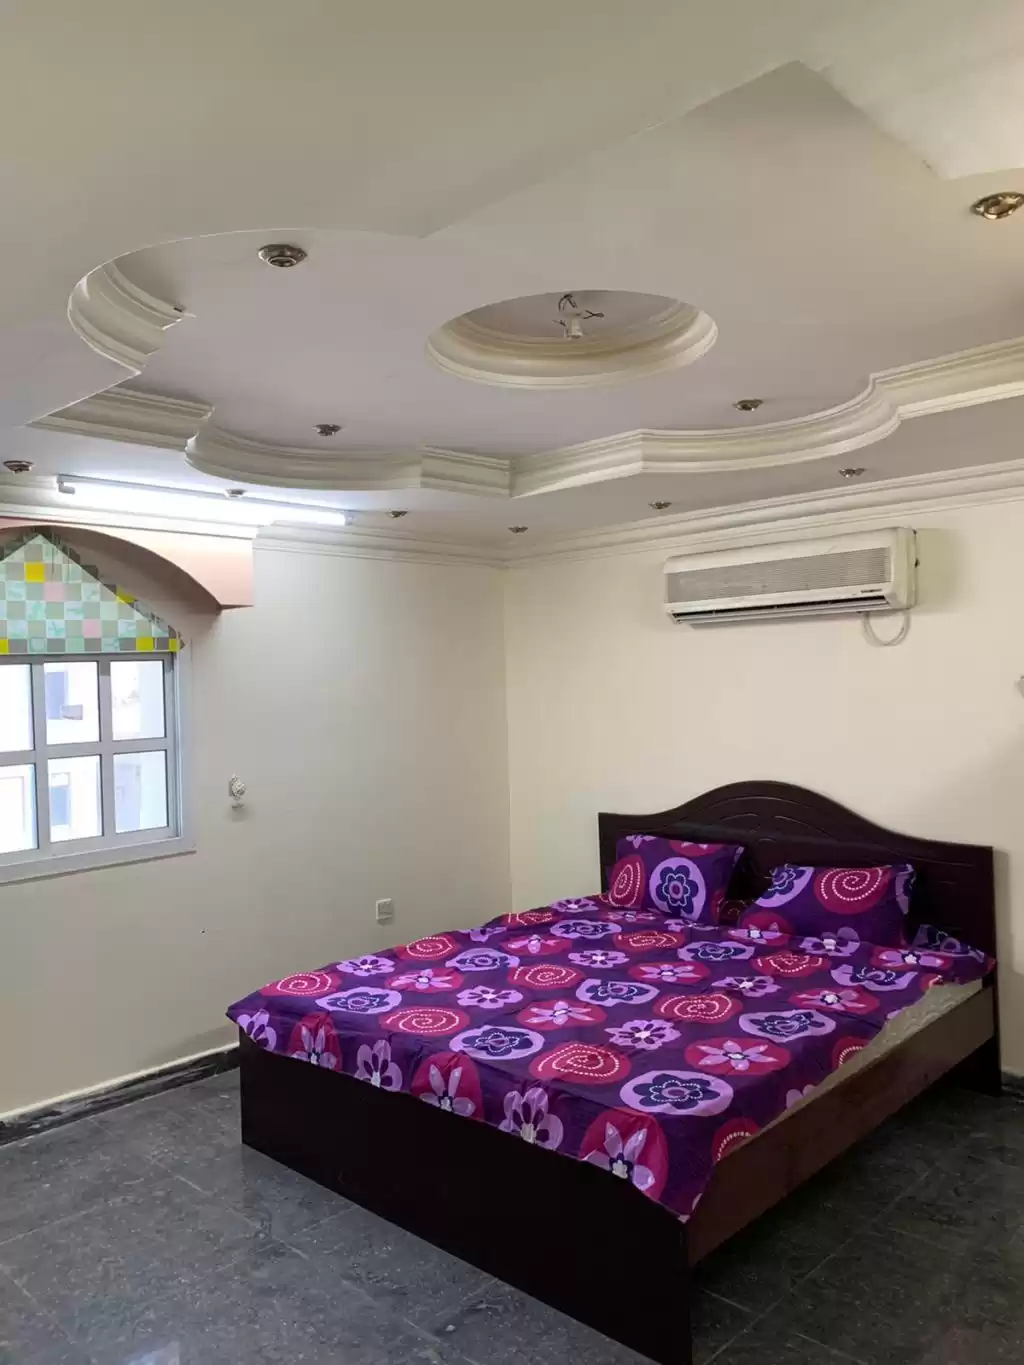 Residential Ready Property Studio F/F Apartment  for rent in Al Sadd , Doha #13999 - 1  image 